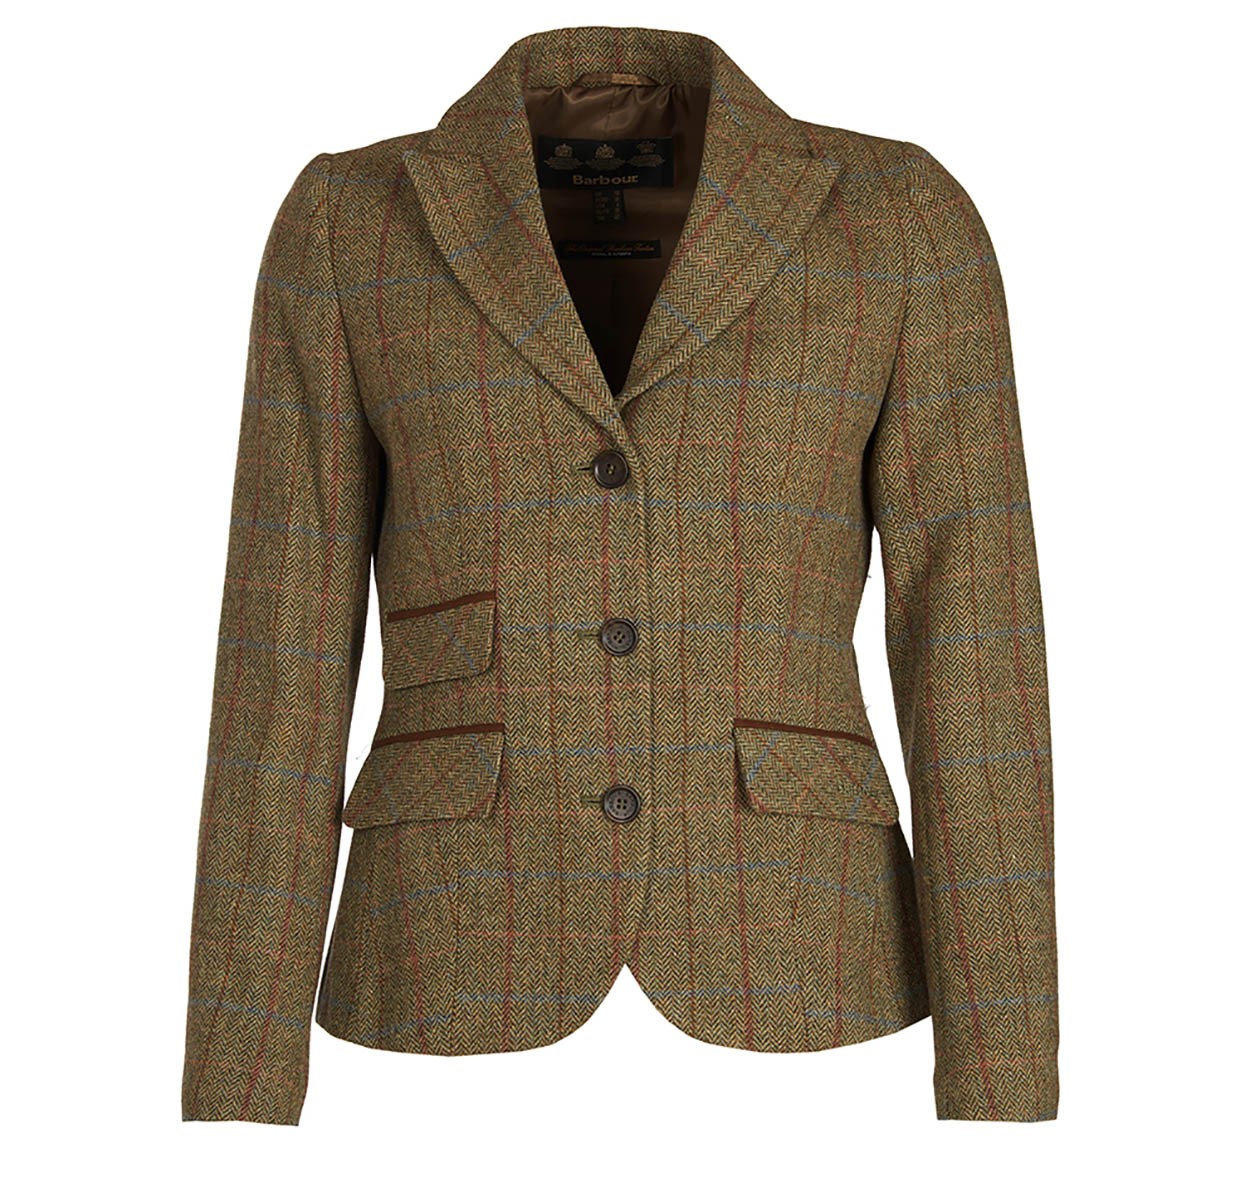 Barbour Rannerdale Tailored Jacket 